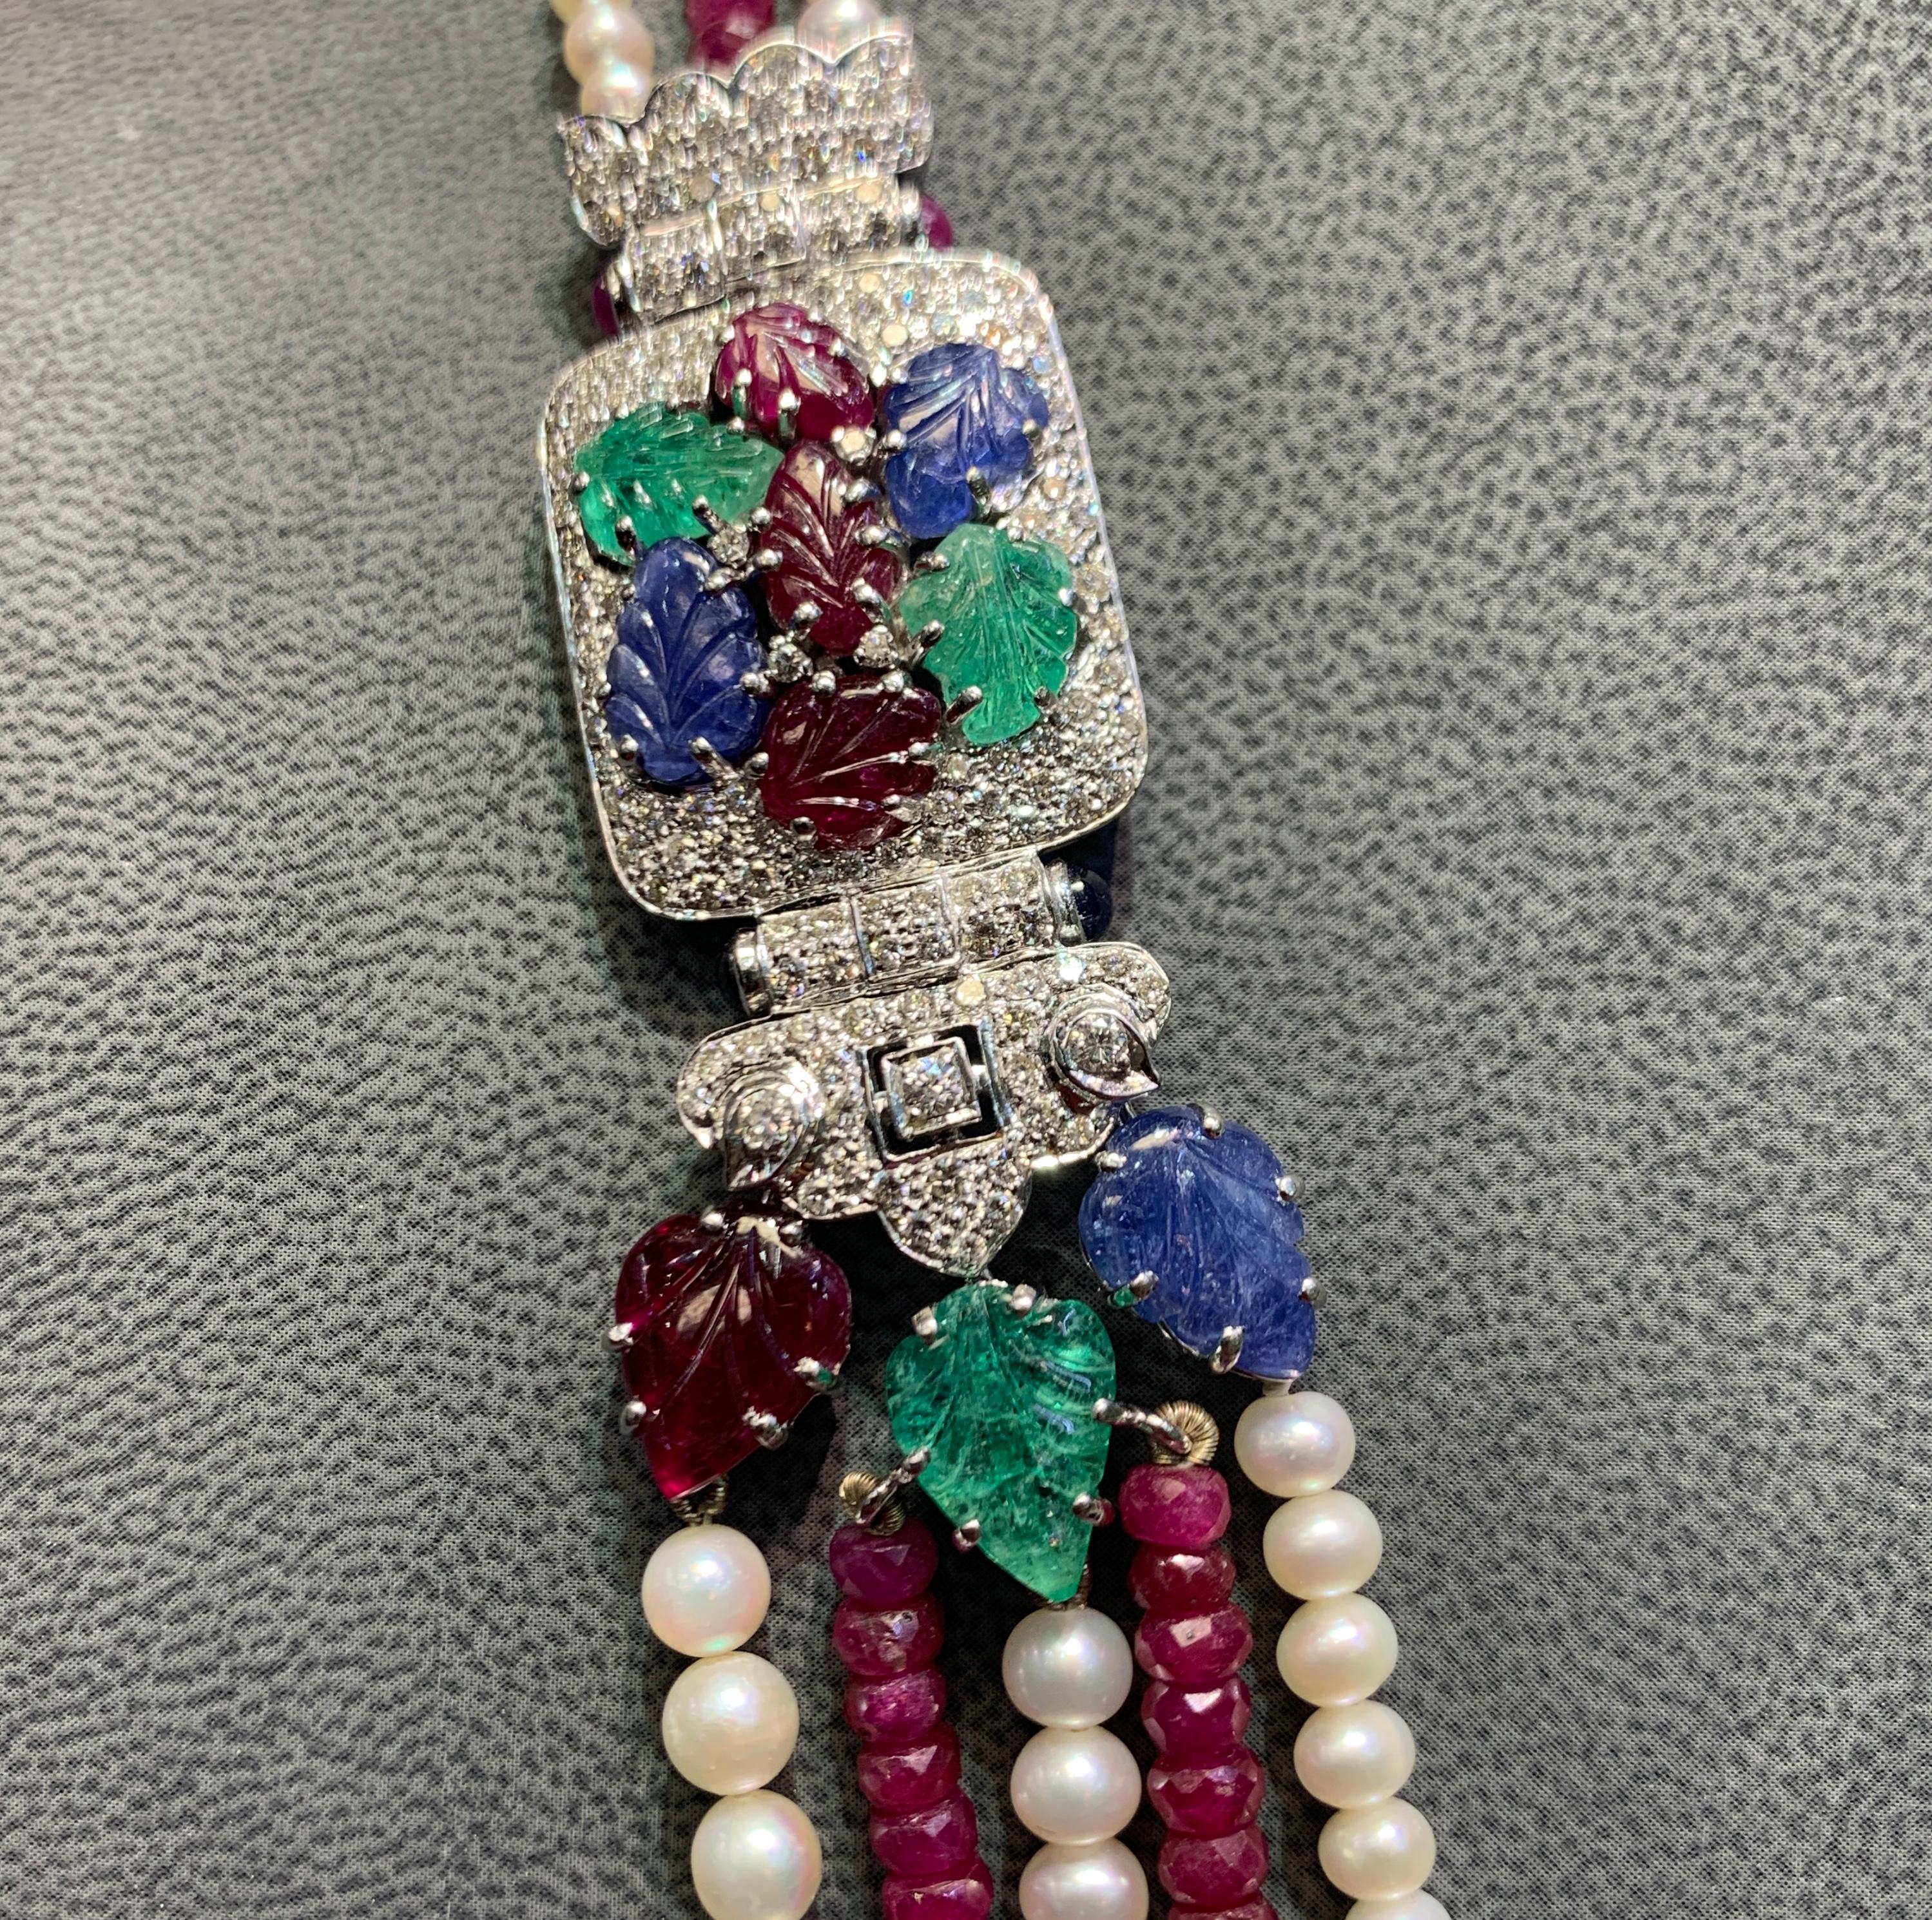 Tutti Frutti Ruby Bead and Cultured Pearl Necklace
4 Strands of ruby beads & 7 strands of pearls attached by ruby sapphire, emerald & diamonds leaf enhancers.
longest strand length: 11.75